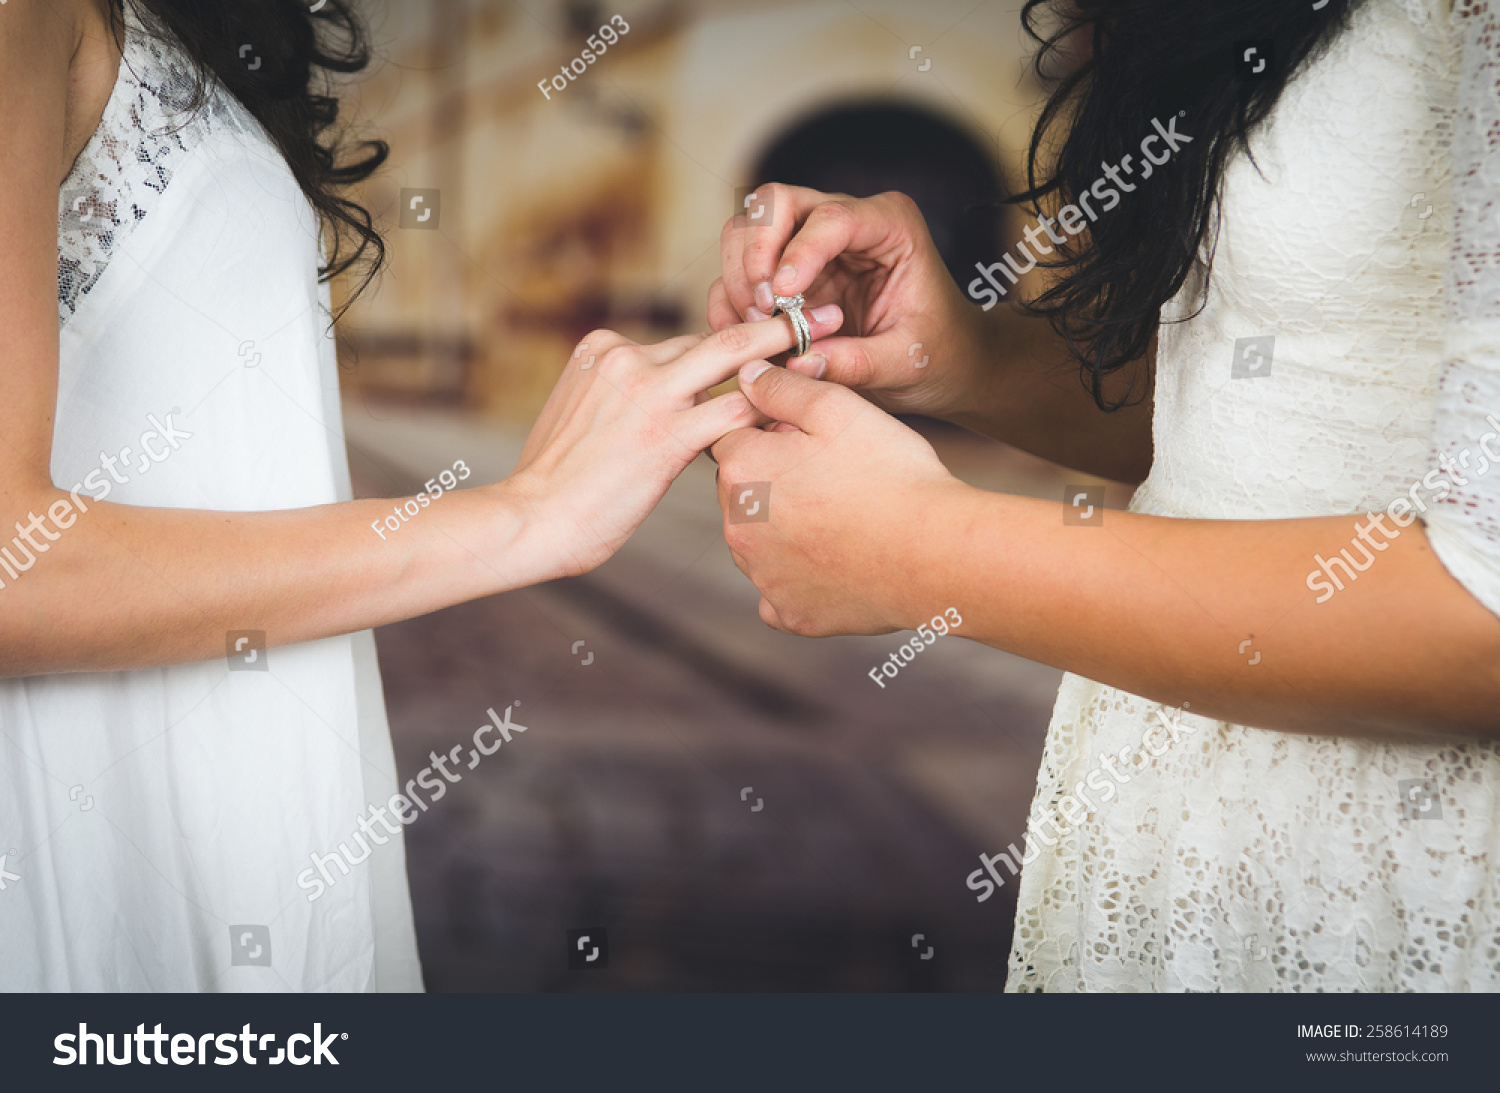 Wedding Beautiful Lesbian Couple In Love Getting Married Concept Of Marriage Equality Stock